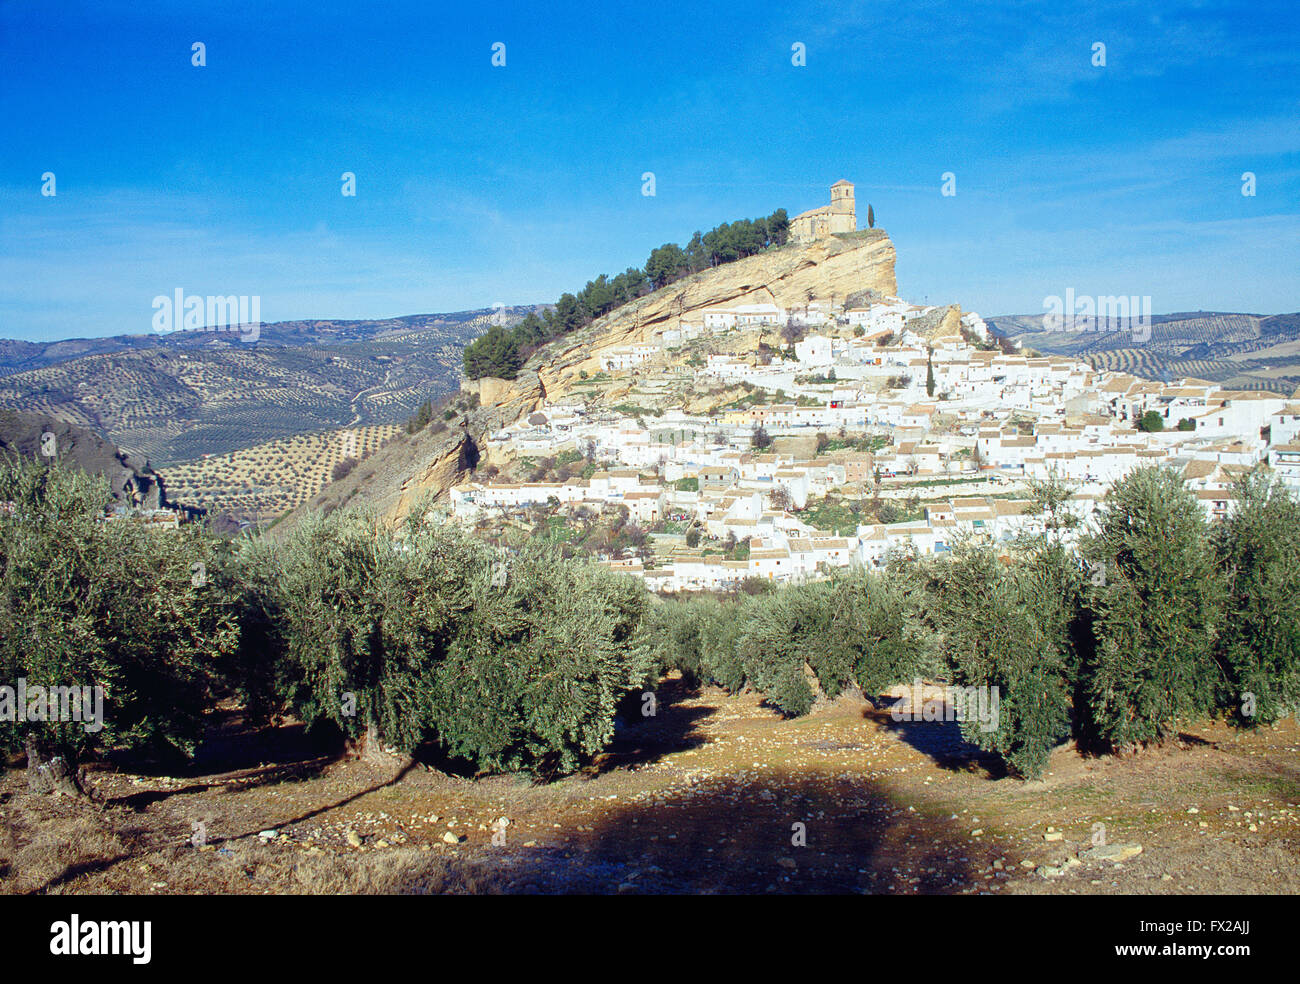 Overview and olive groves. Montefrio, Granada province, Andalucia, Spain. One of the most beautiful villages in the world. Stock Photo